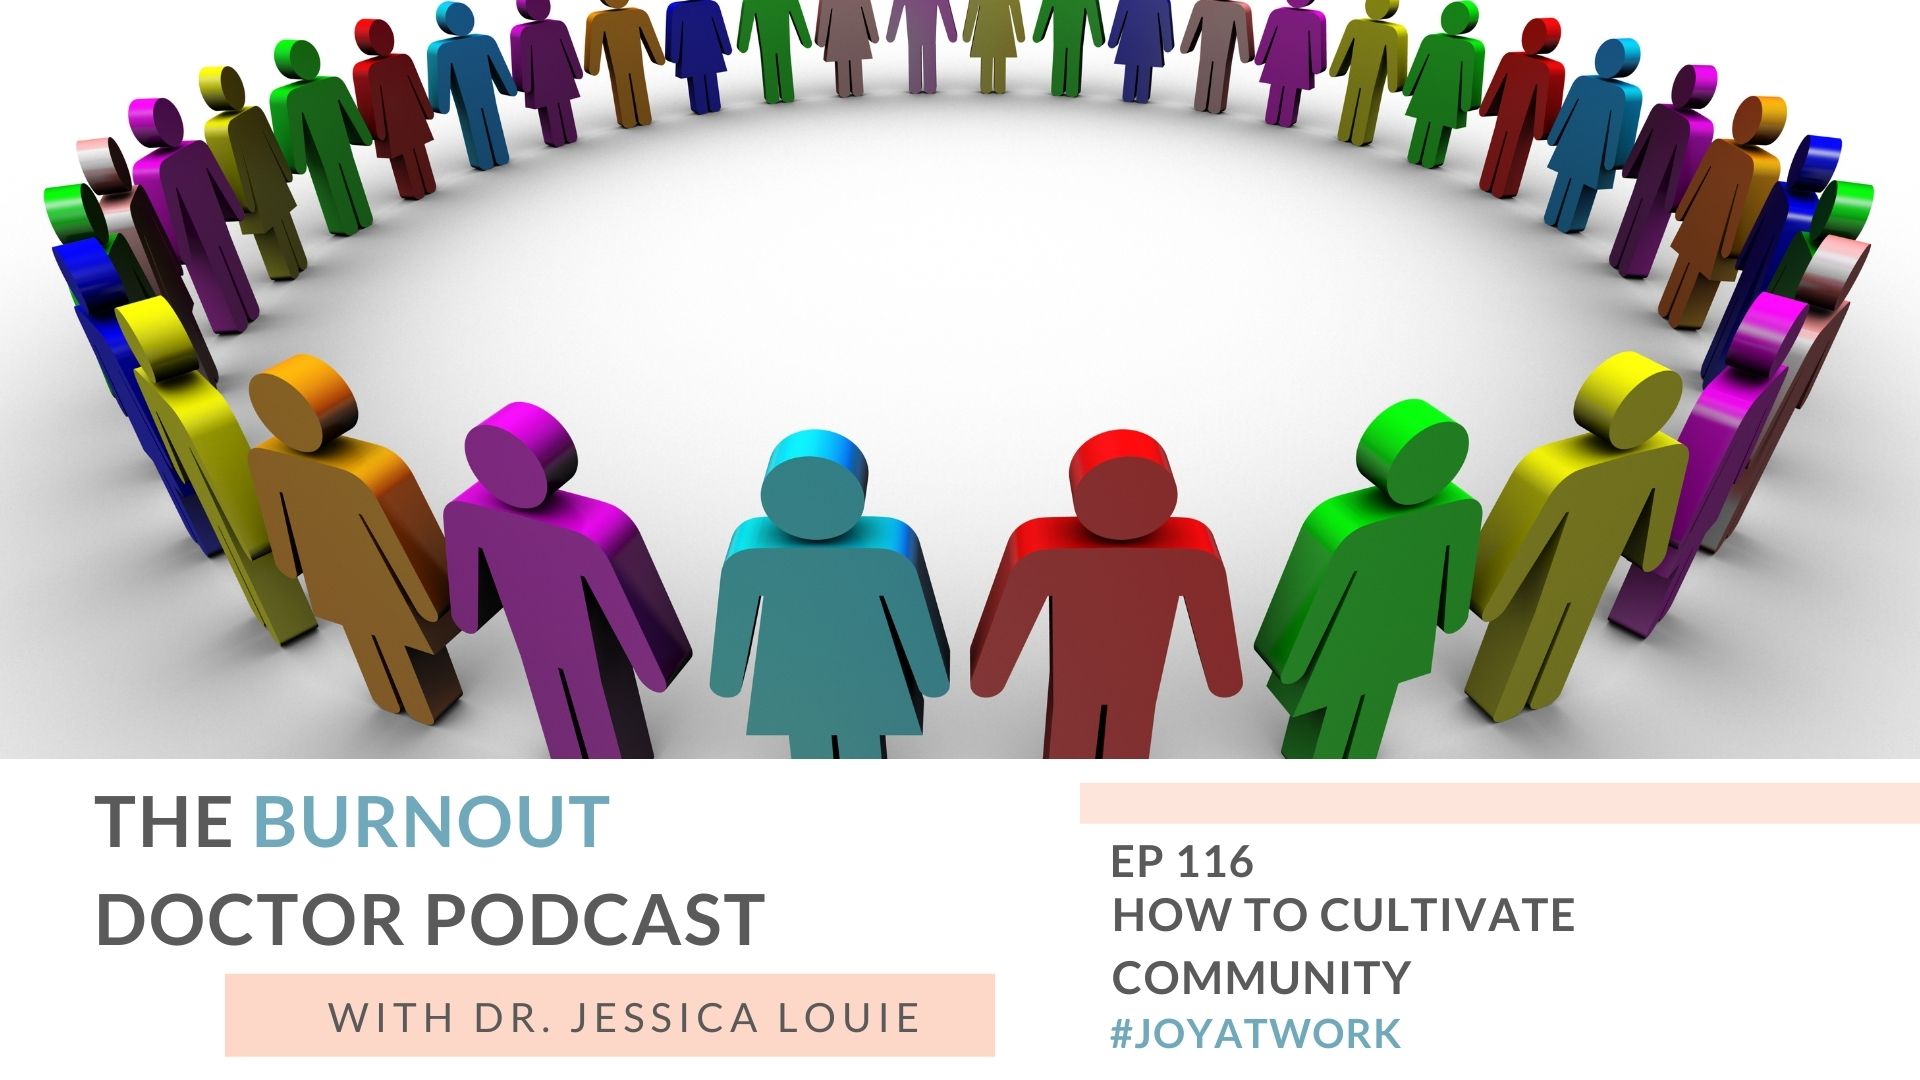 How to cultivate community and relationships quality over quantity. Pharmacist burnout coaching. The Burnout Doctor Podcast by Dr. Jessica Louie.